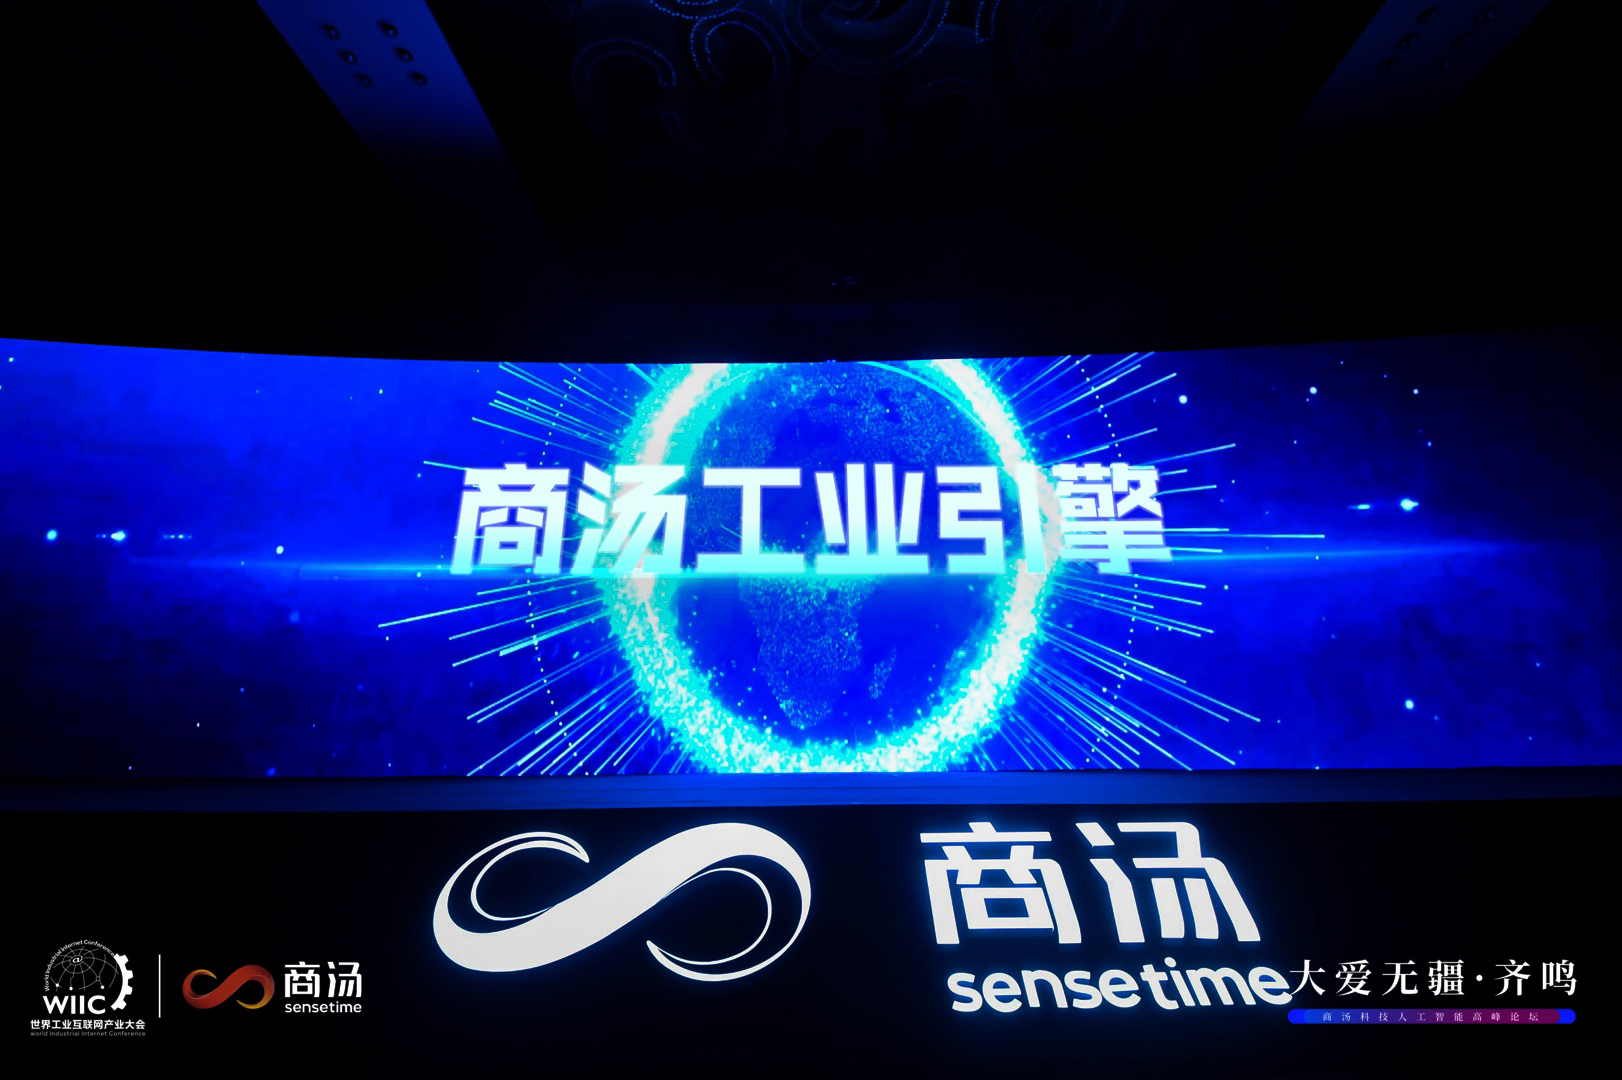 SenseTime unveiled its AI Industrial Engine technology at WIIC.jpg